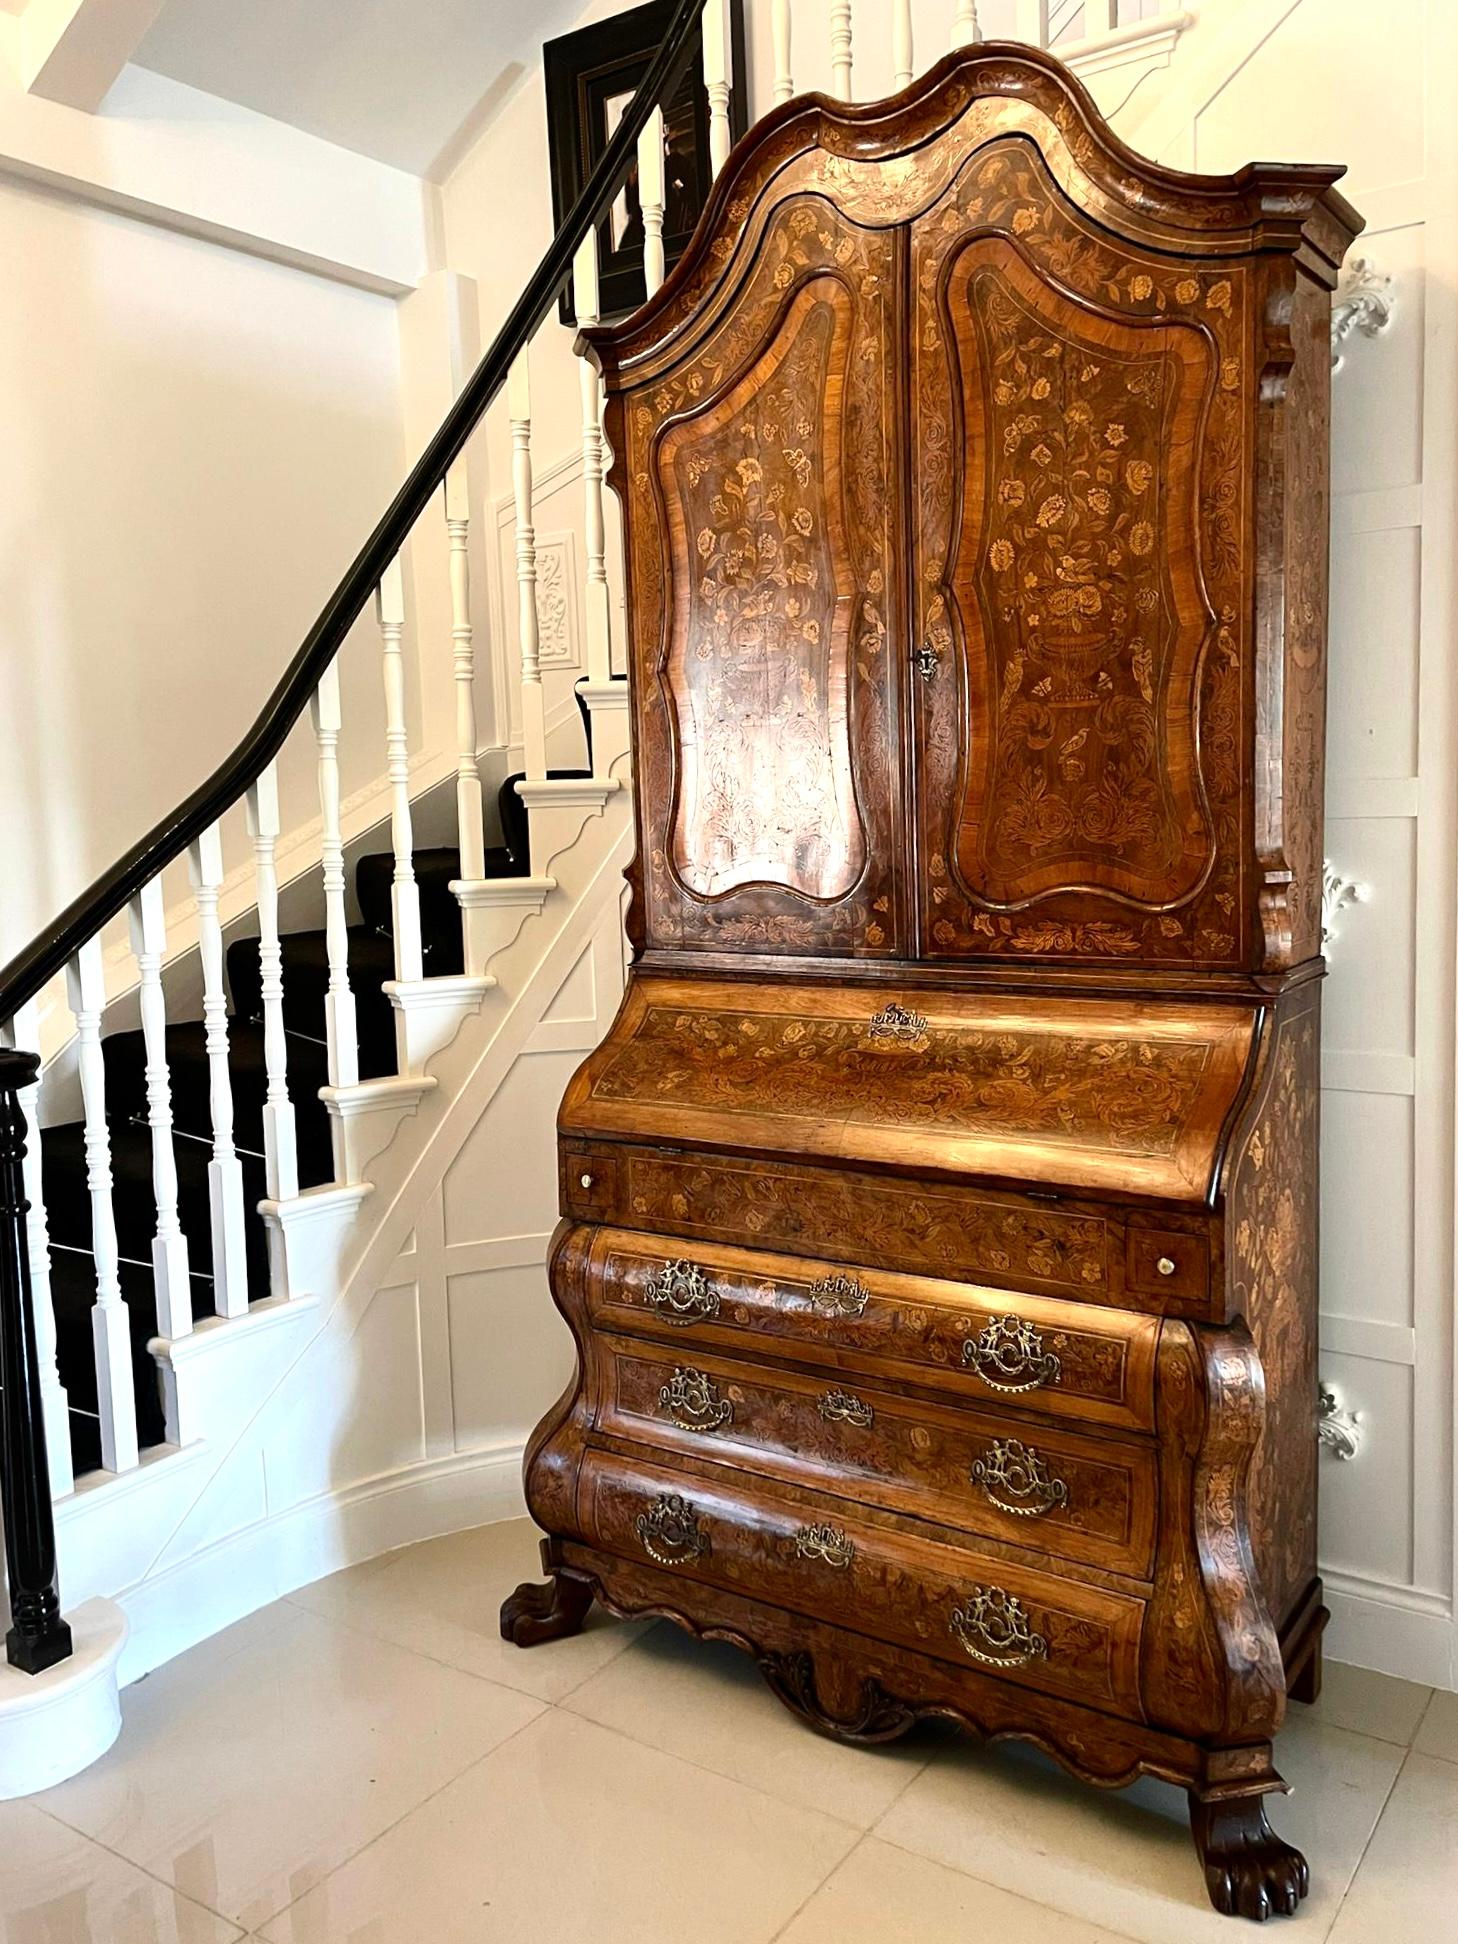 Outstanding quality 18th century antique Dutch marquetry inlaid burr walnut bureau bookcase having an outstanding quality Dutch marquetry inlaid burr walnut bureau bookcase with a shaped cornice above a pair of marquetry inlaid panelled doors